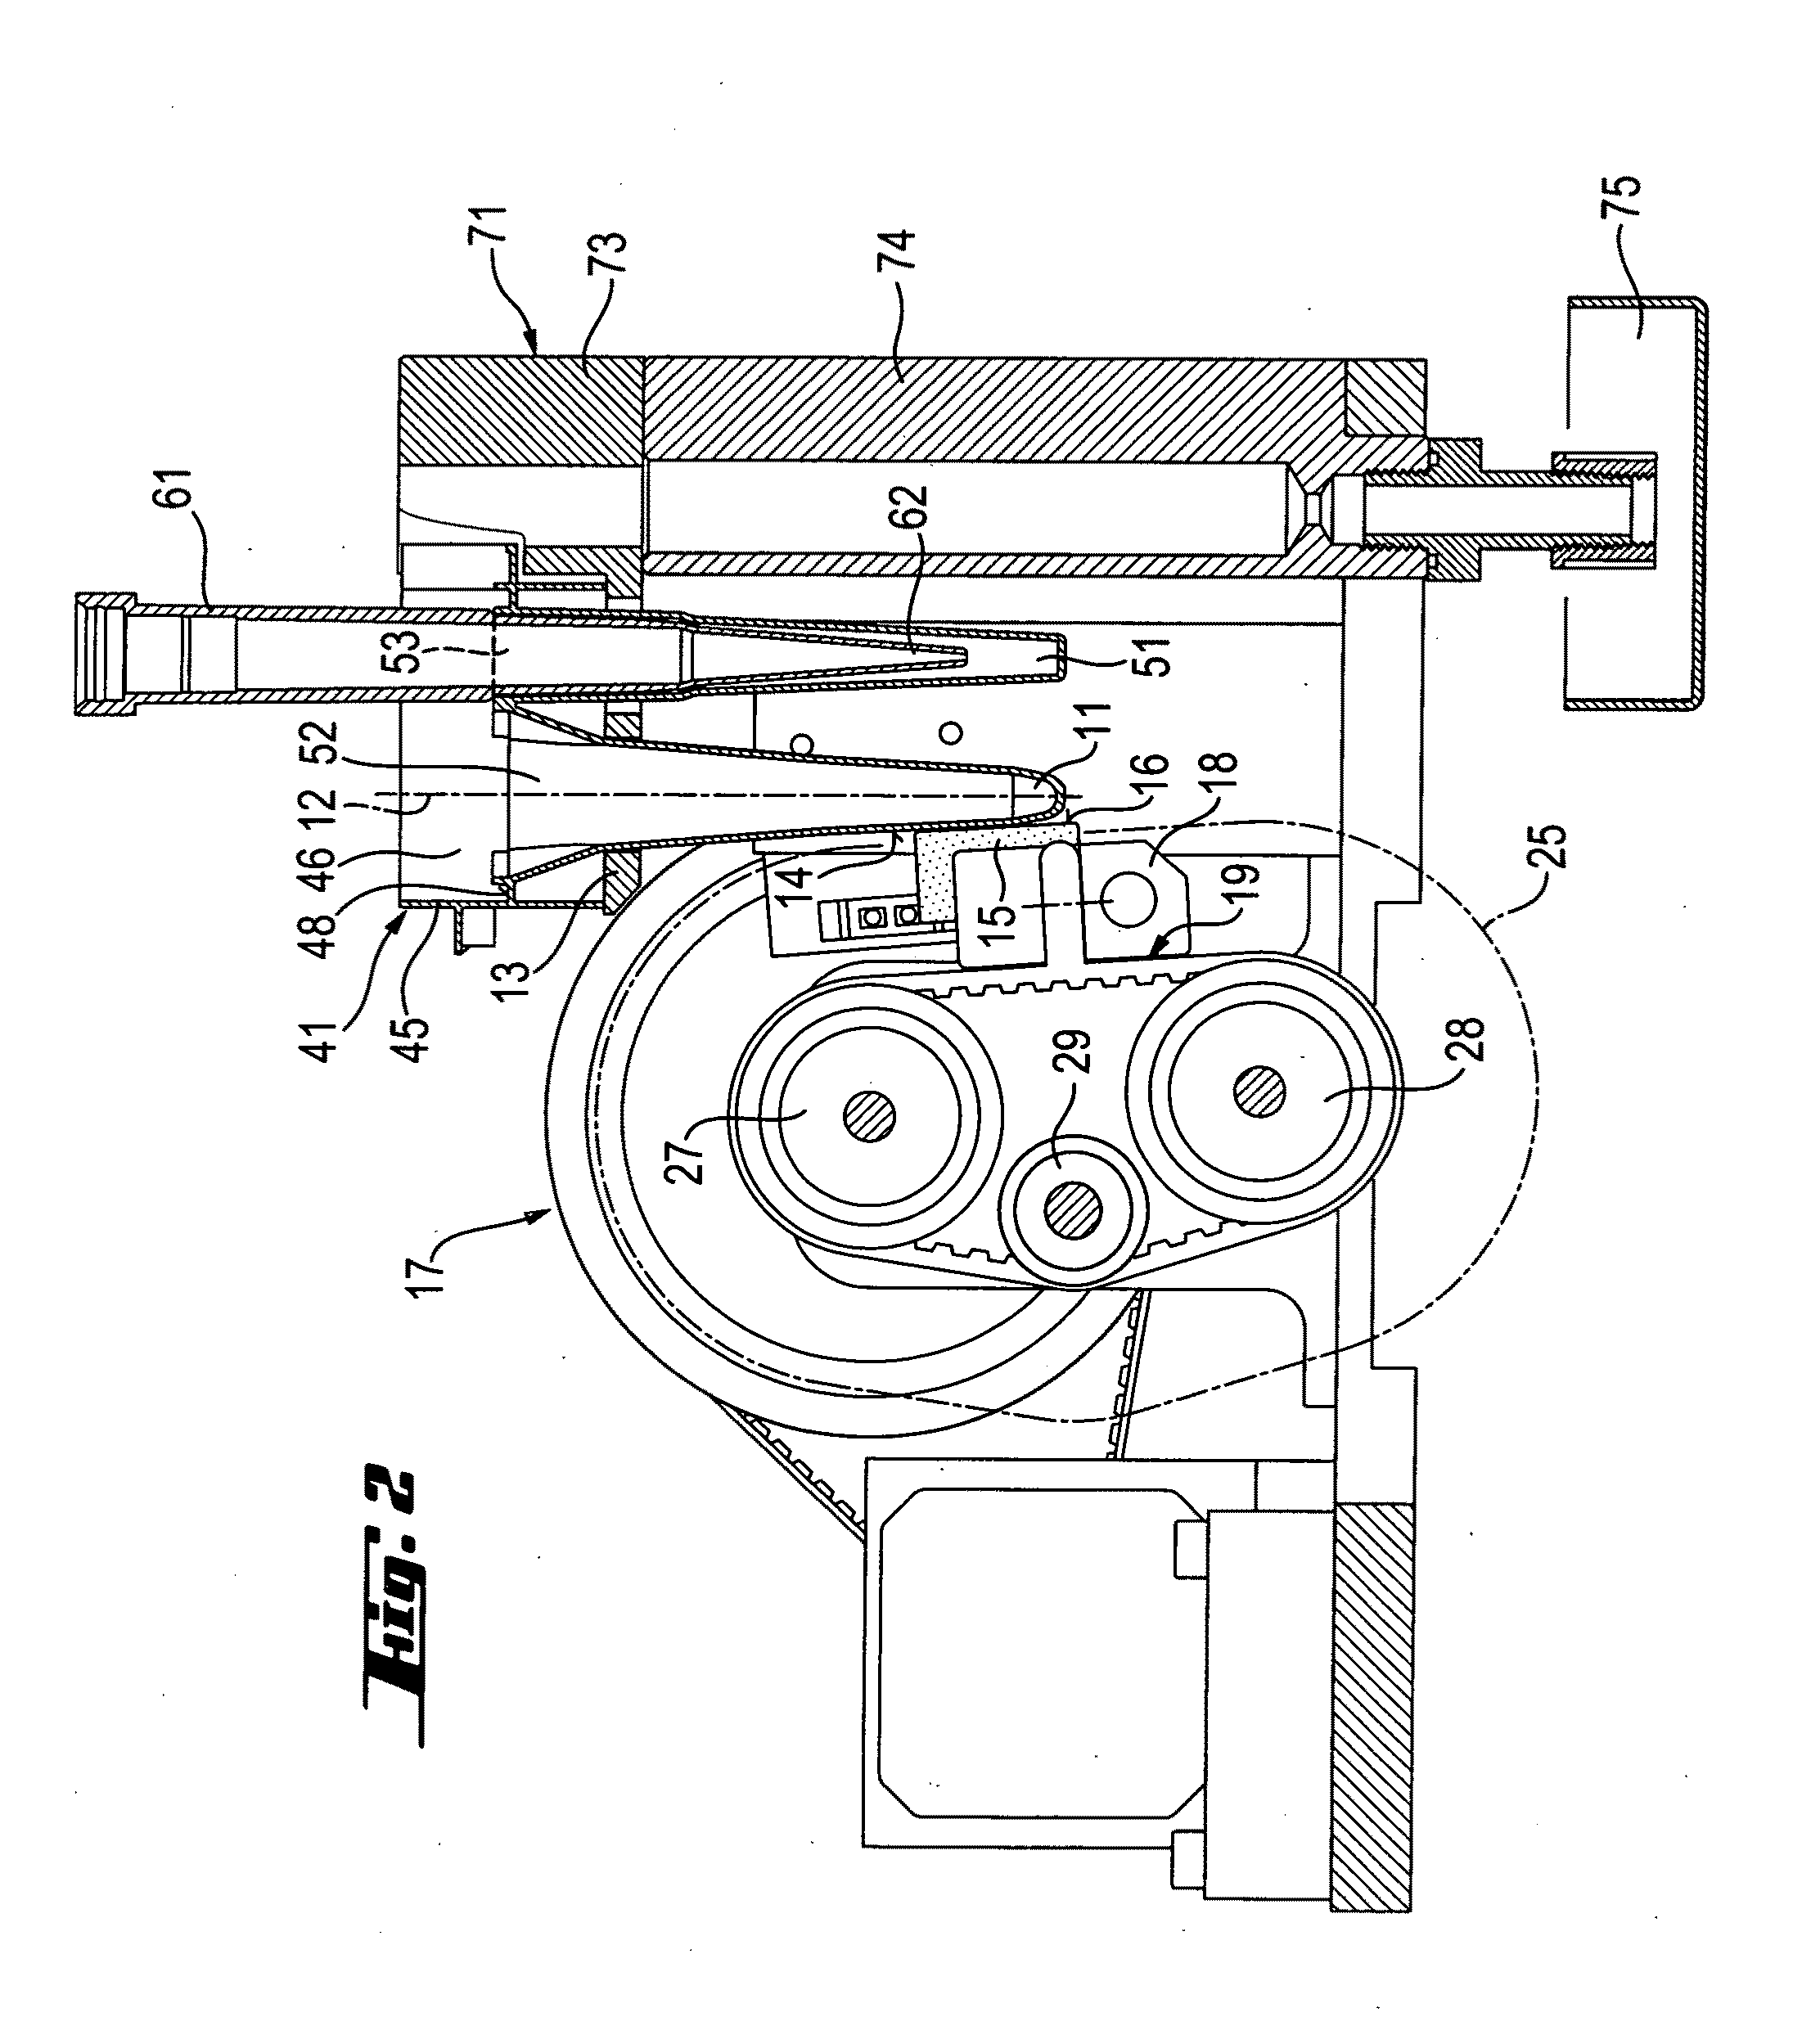 Apparatus for separating magnetic particles from liquids containing said particles, and an array of vessels suitable for use with such an apparatus